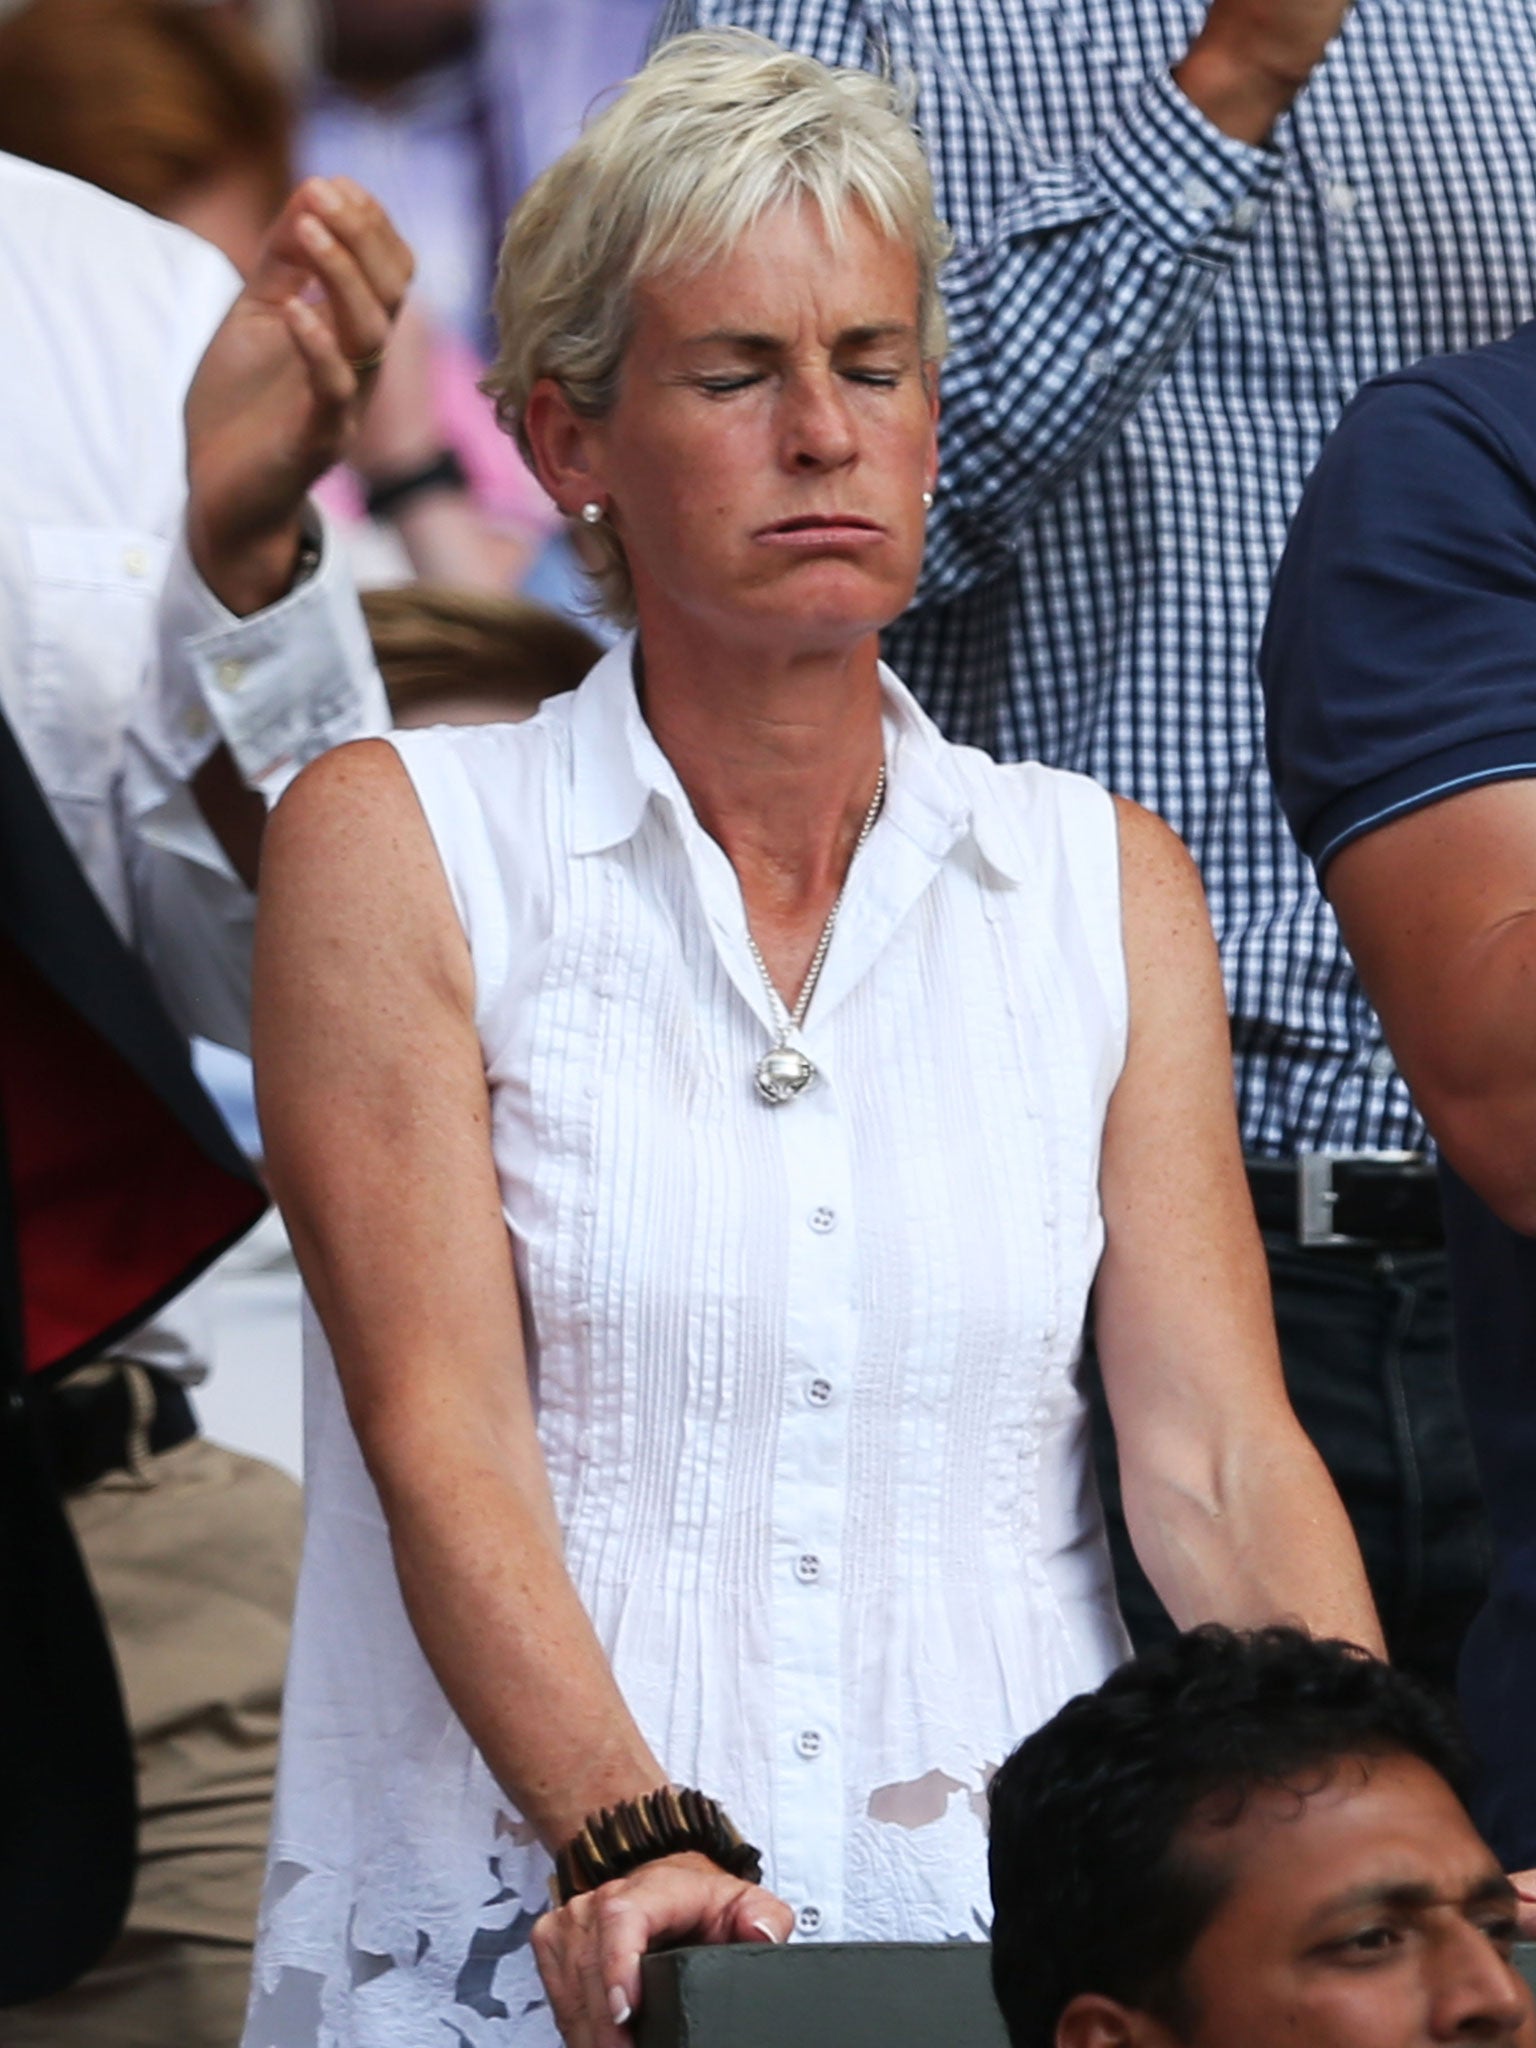 Judy Murray reacts after her son's victory in the Gentlemen's Singles Final match against Novak Djokovic